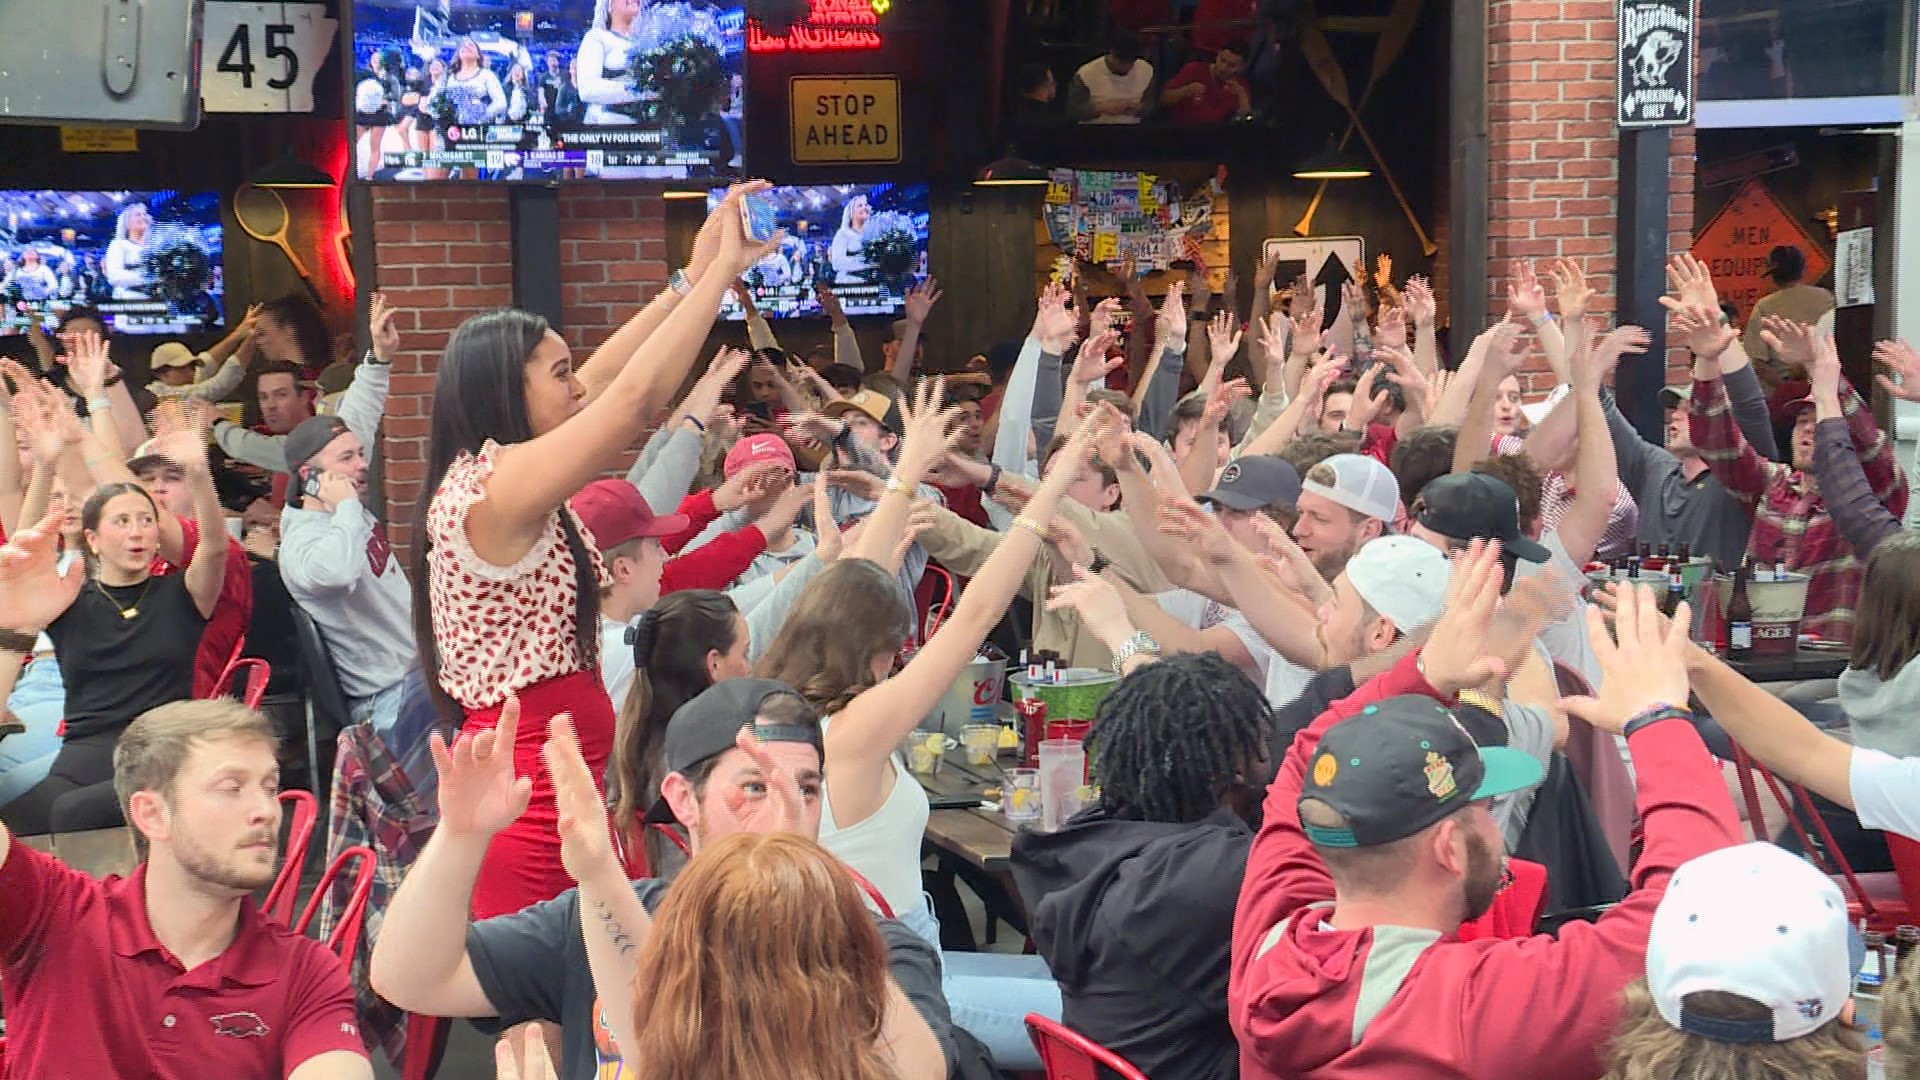 Even with Arkansas' loss to UConn in the Sweet 16, fans say they will continue to "call the Hogs" no matter what!